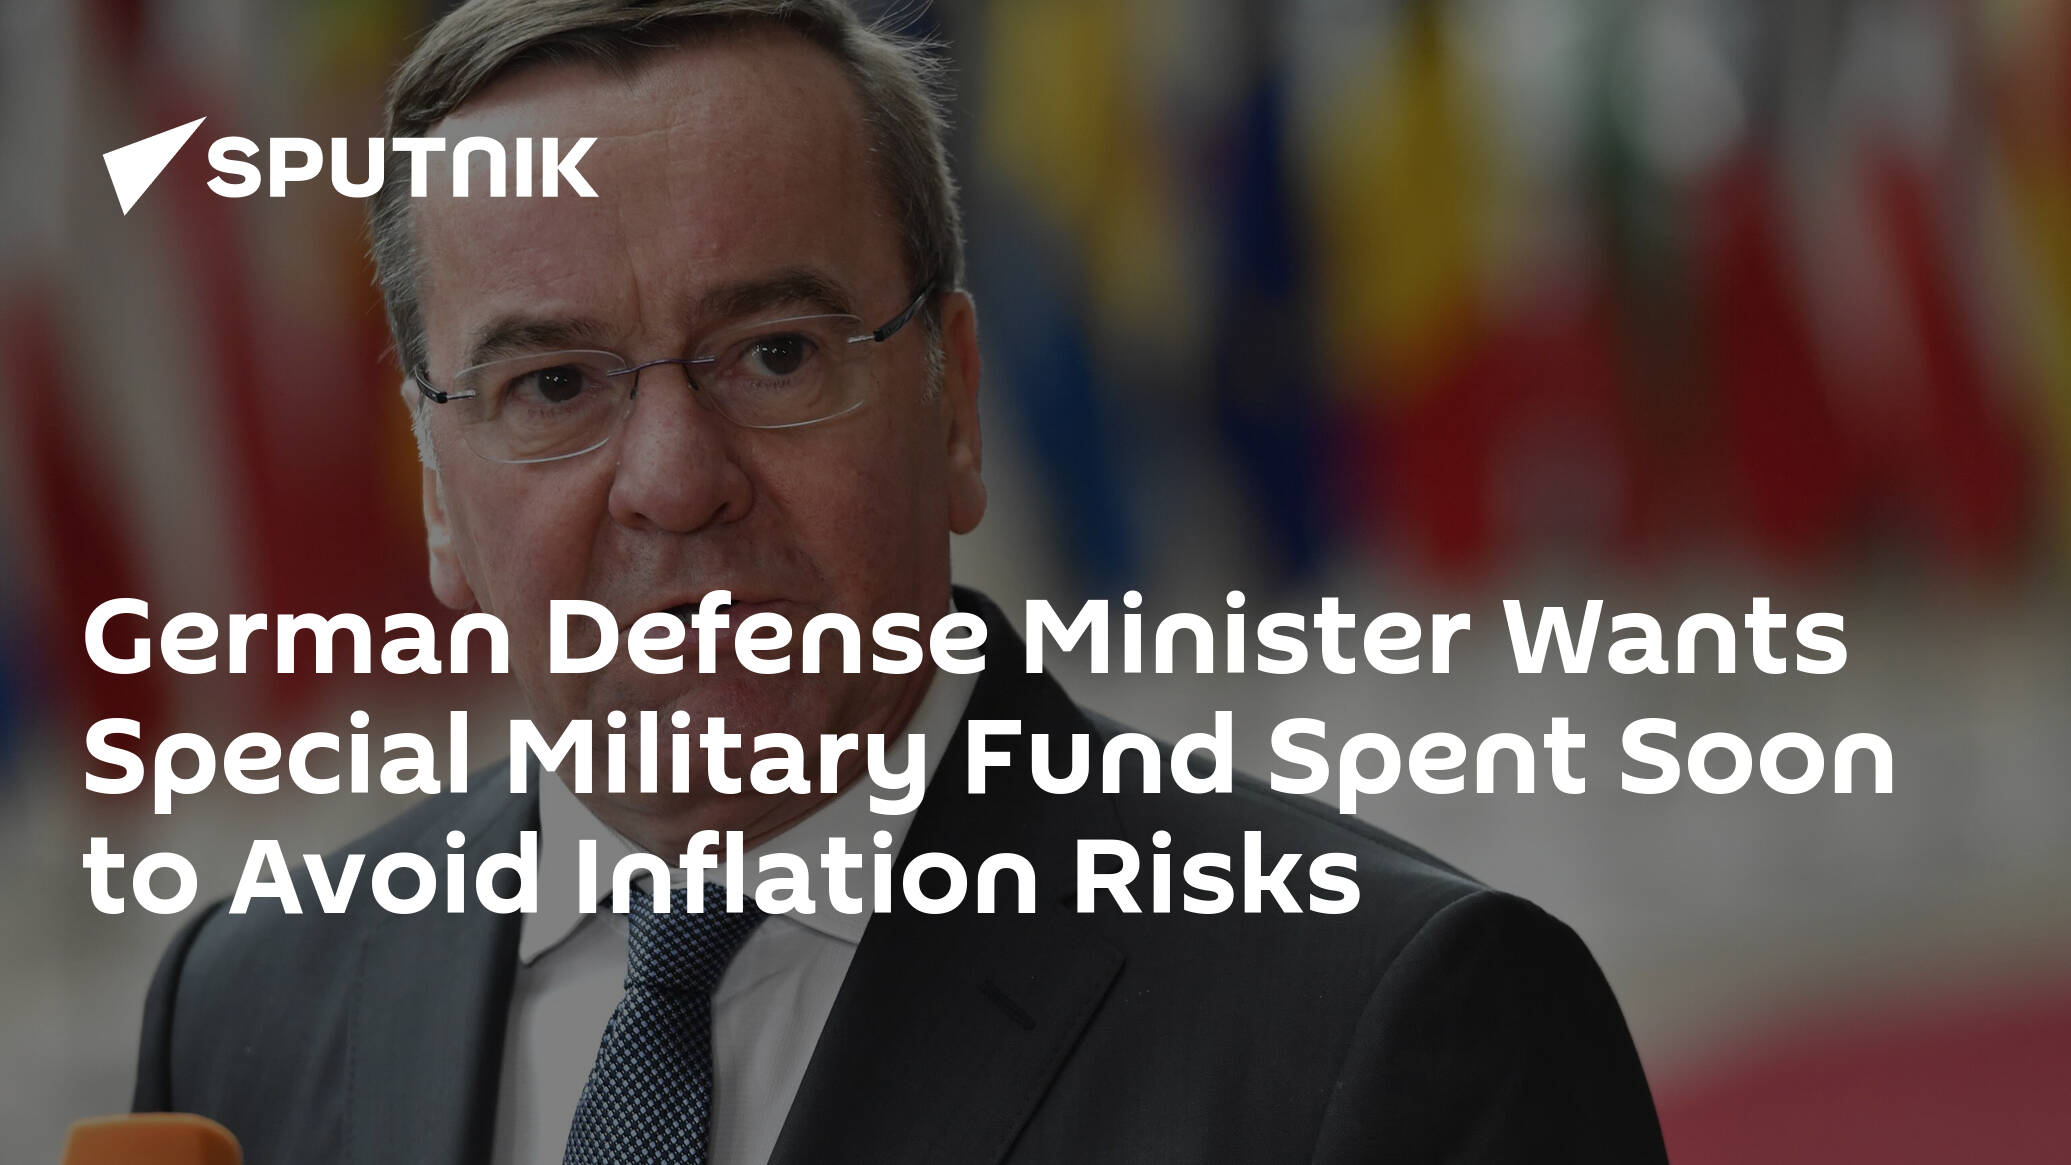 German Defense Minister Wants Special Military Fund Spent Soon to Avoid Inflation Risks